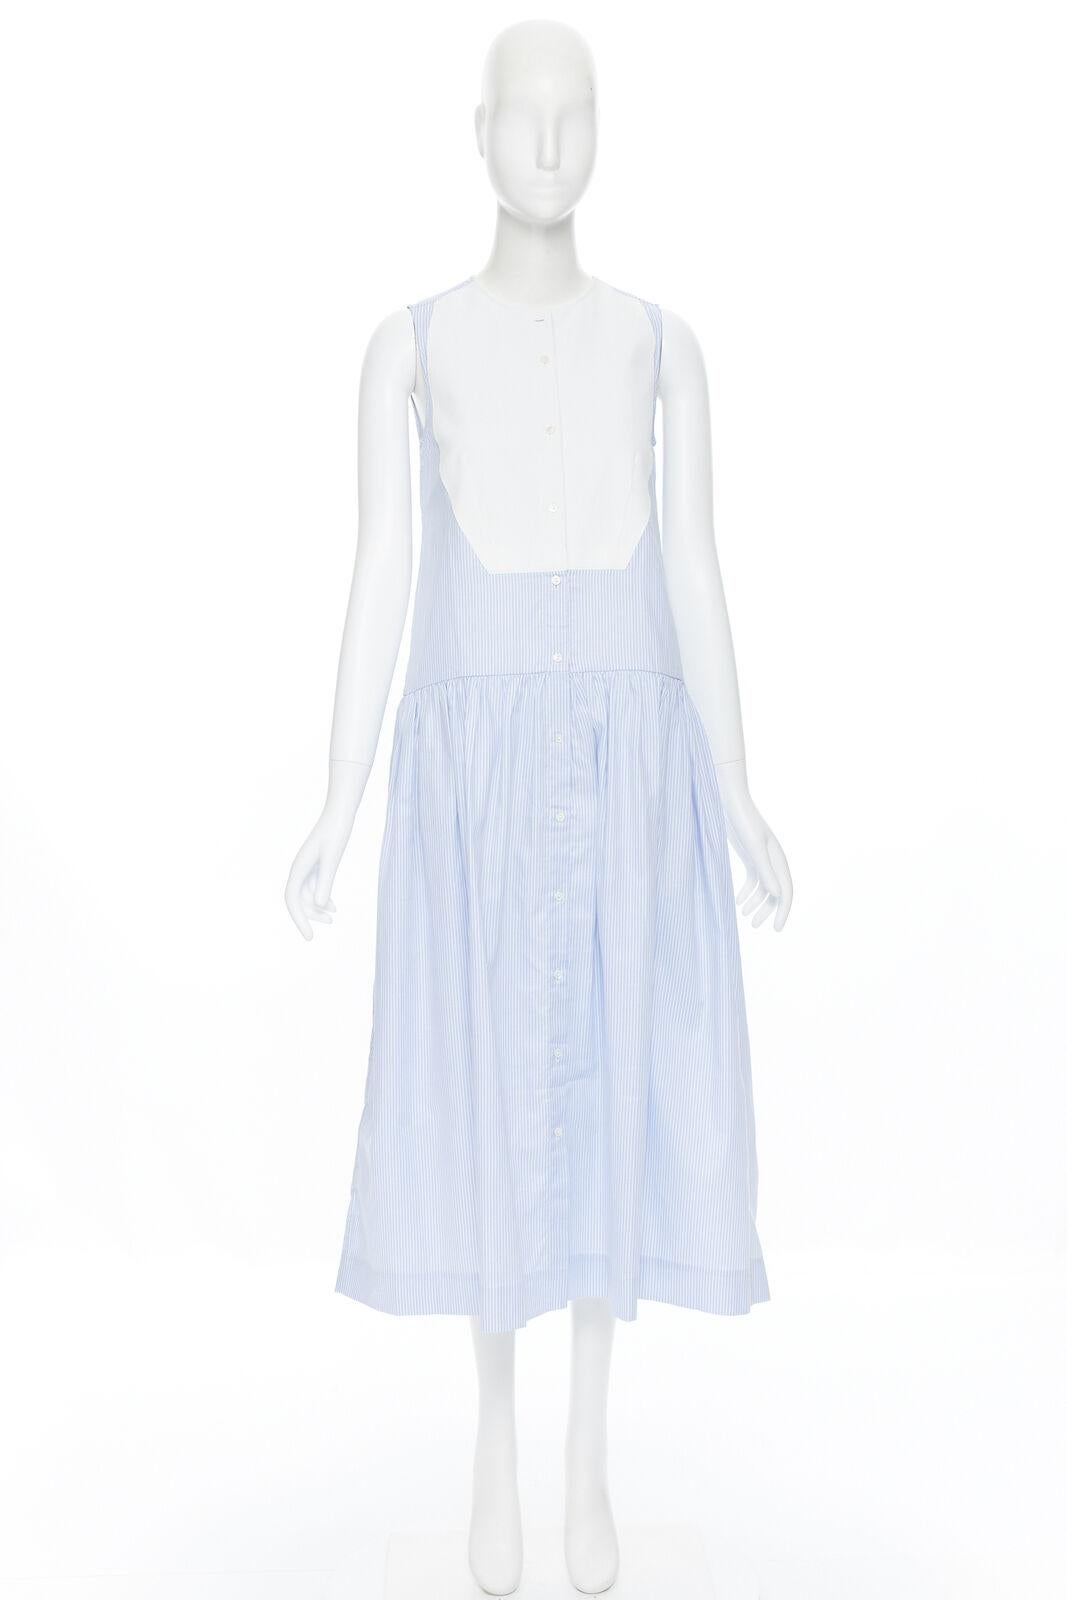 PALMER HARDING 100% cotton white bib front blue striped summer dress UK8 XS In Good Condition For Sale In Hong Kong, NT